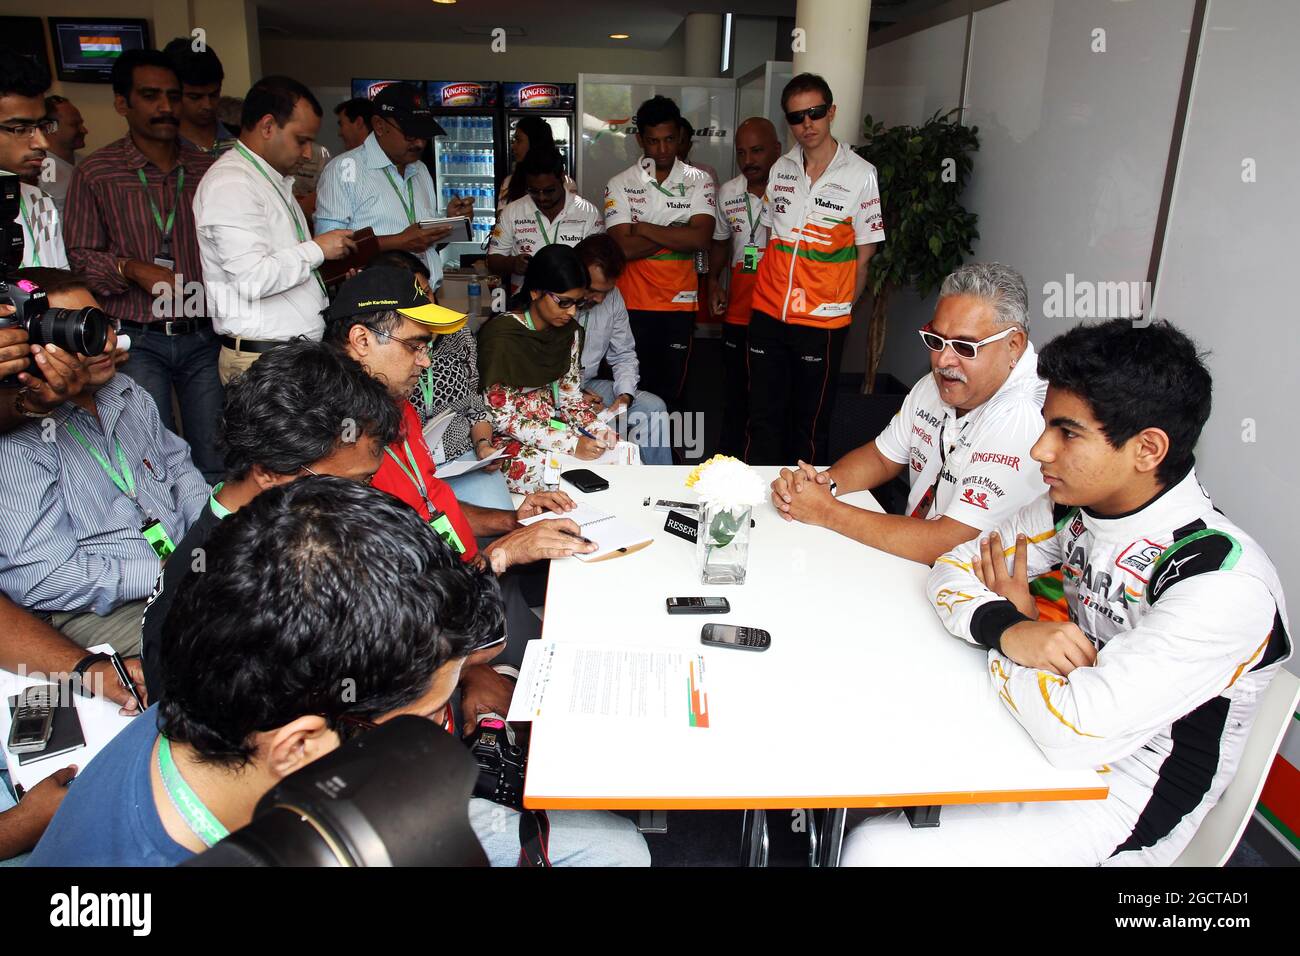 (L to R): Dr. Vijay Mallya (IND) Sahara Force India F1 Team Owner and Jehan Daruvala (IND) Sahara Force India Academy Driver, winner of the British KF3 Karting Championship, with the media. Indian Grand Prix, Saturday 26th October 2013. Greater Noida, New Delhi, India. Stock Photo